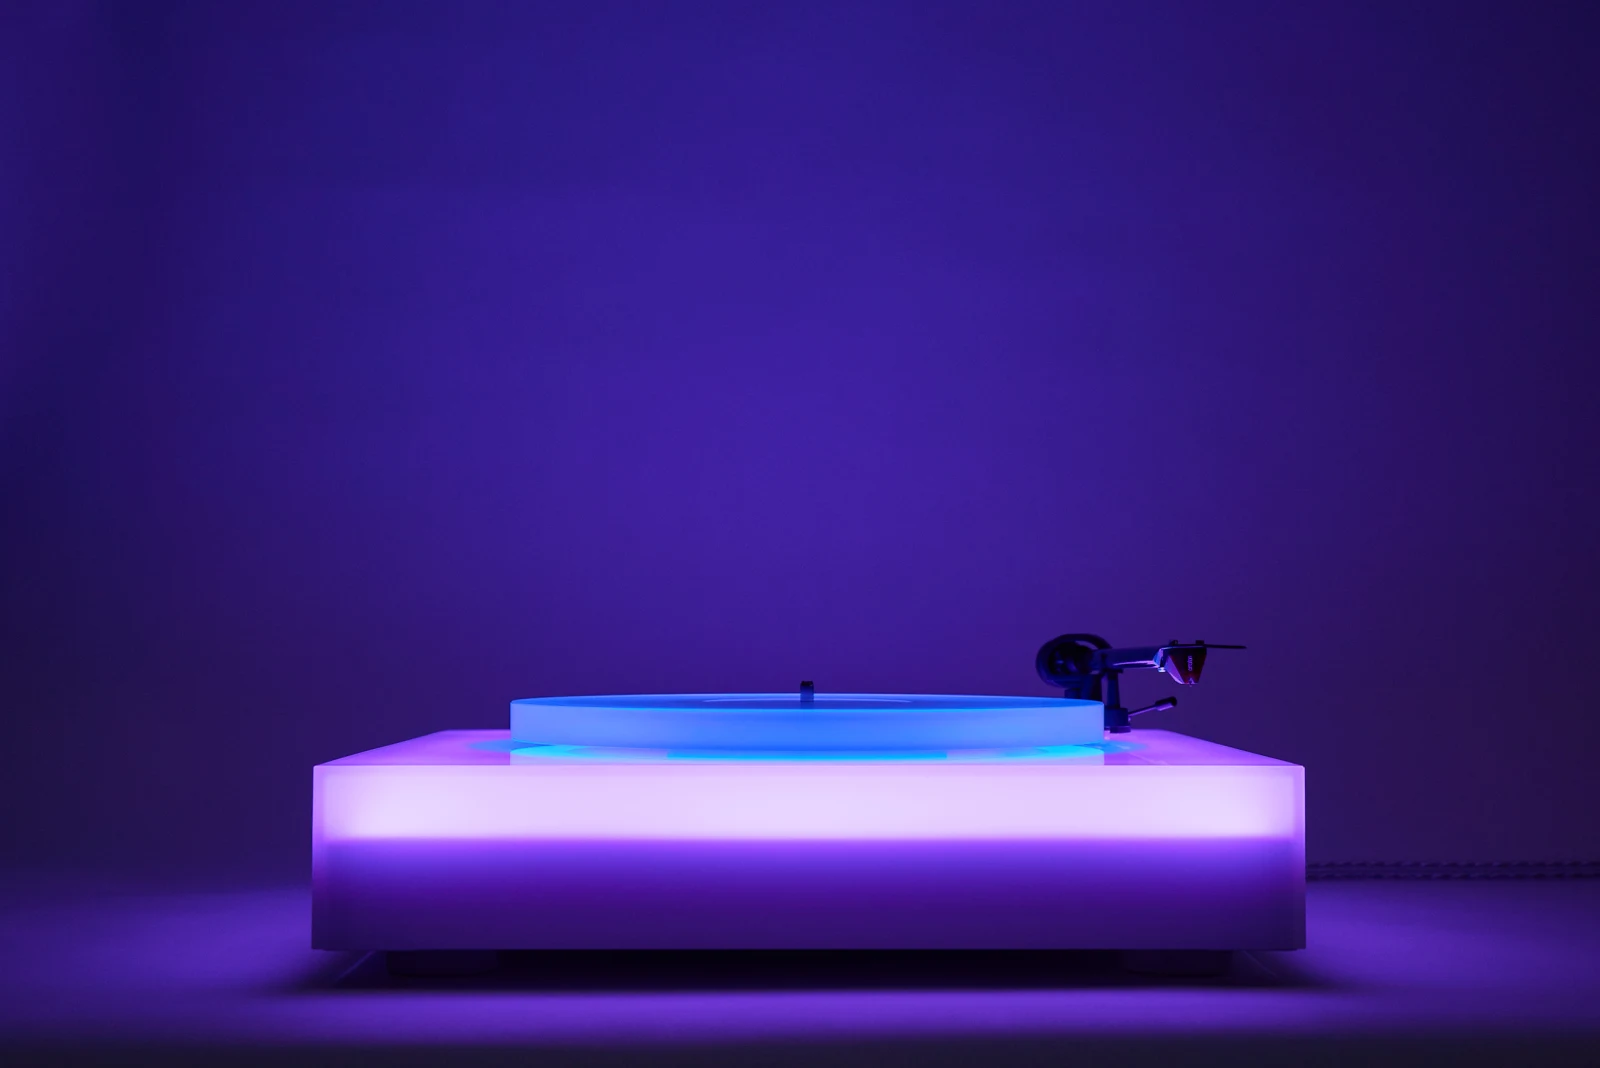 Brian Eno's Beautiful New Turntable Glows & Constantly Changes